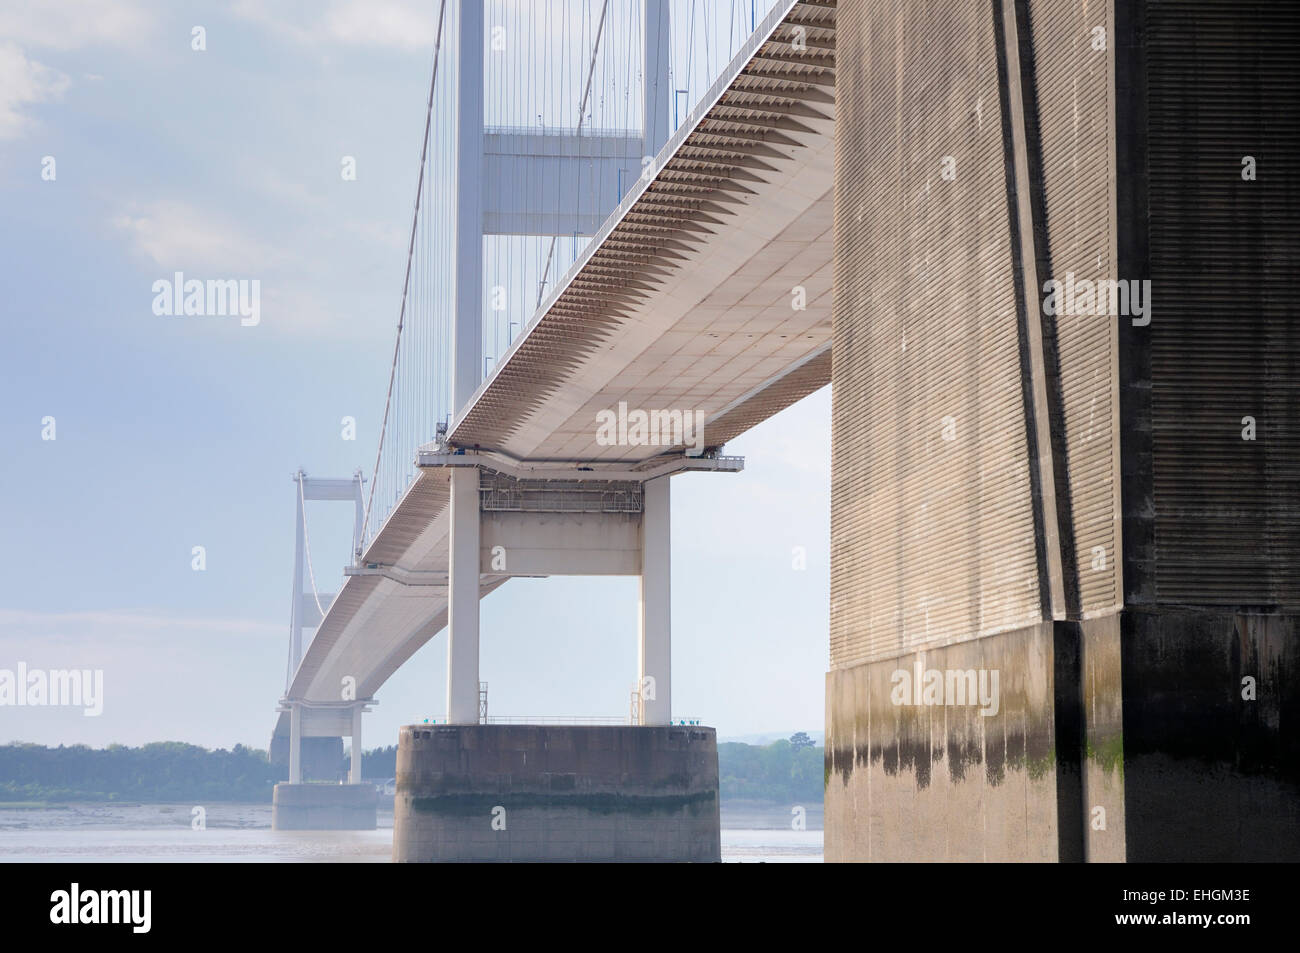 The older Severn suspension bridge spanning the Severn estuary at low tide on a sunny day Stock Photo